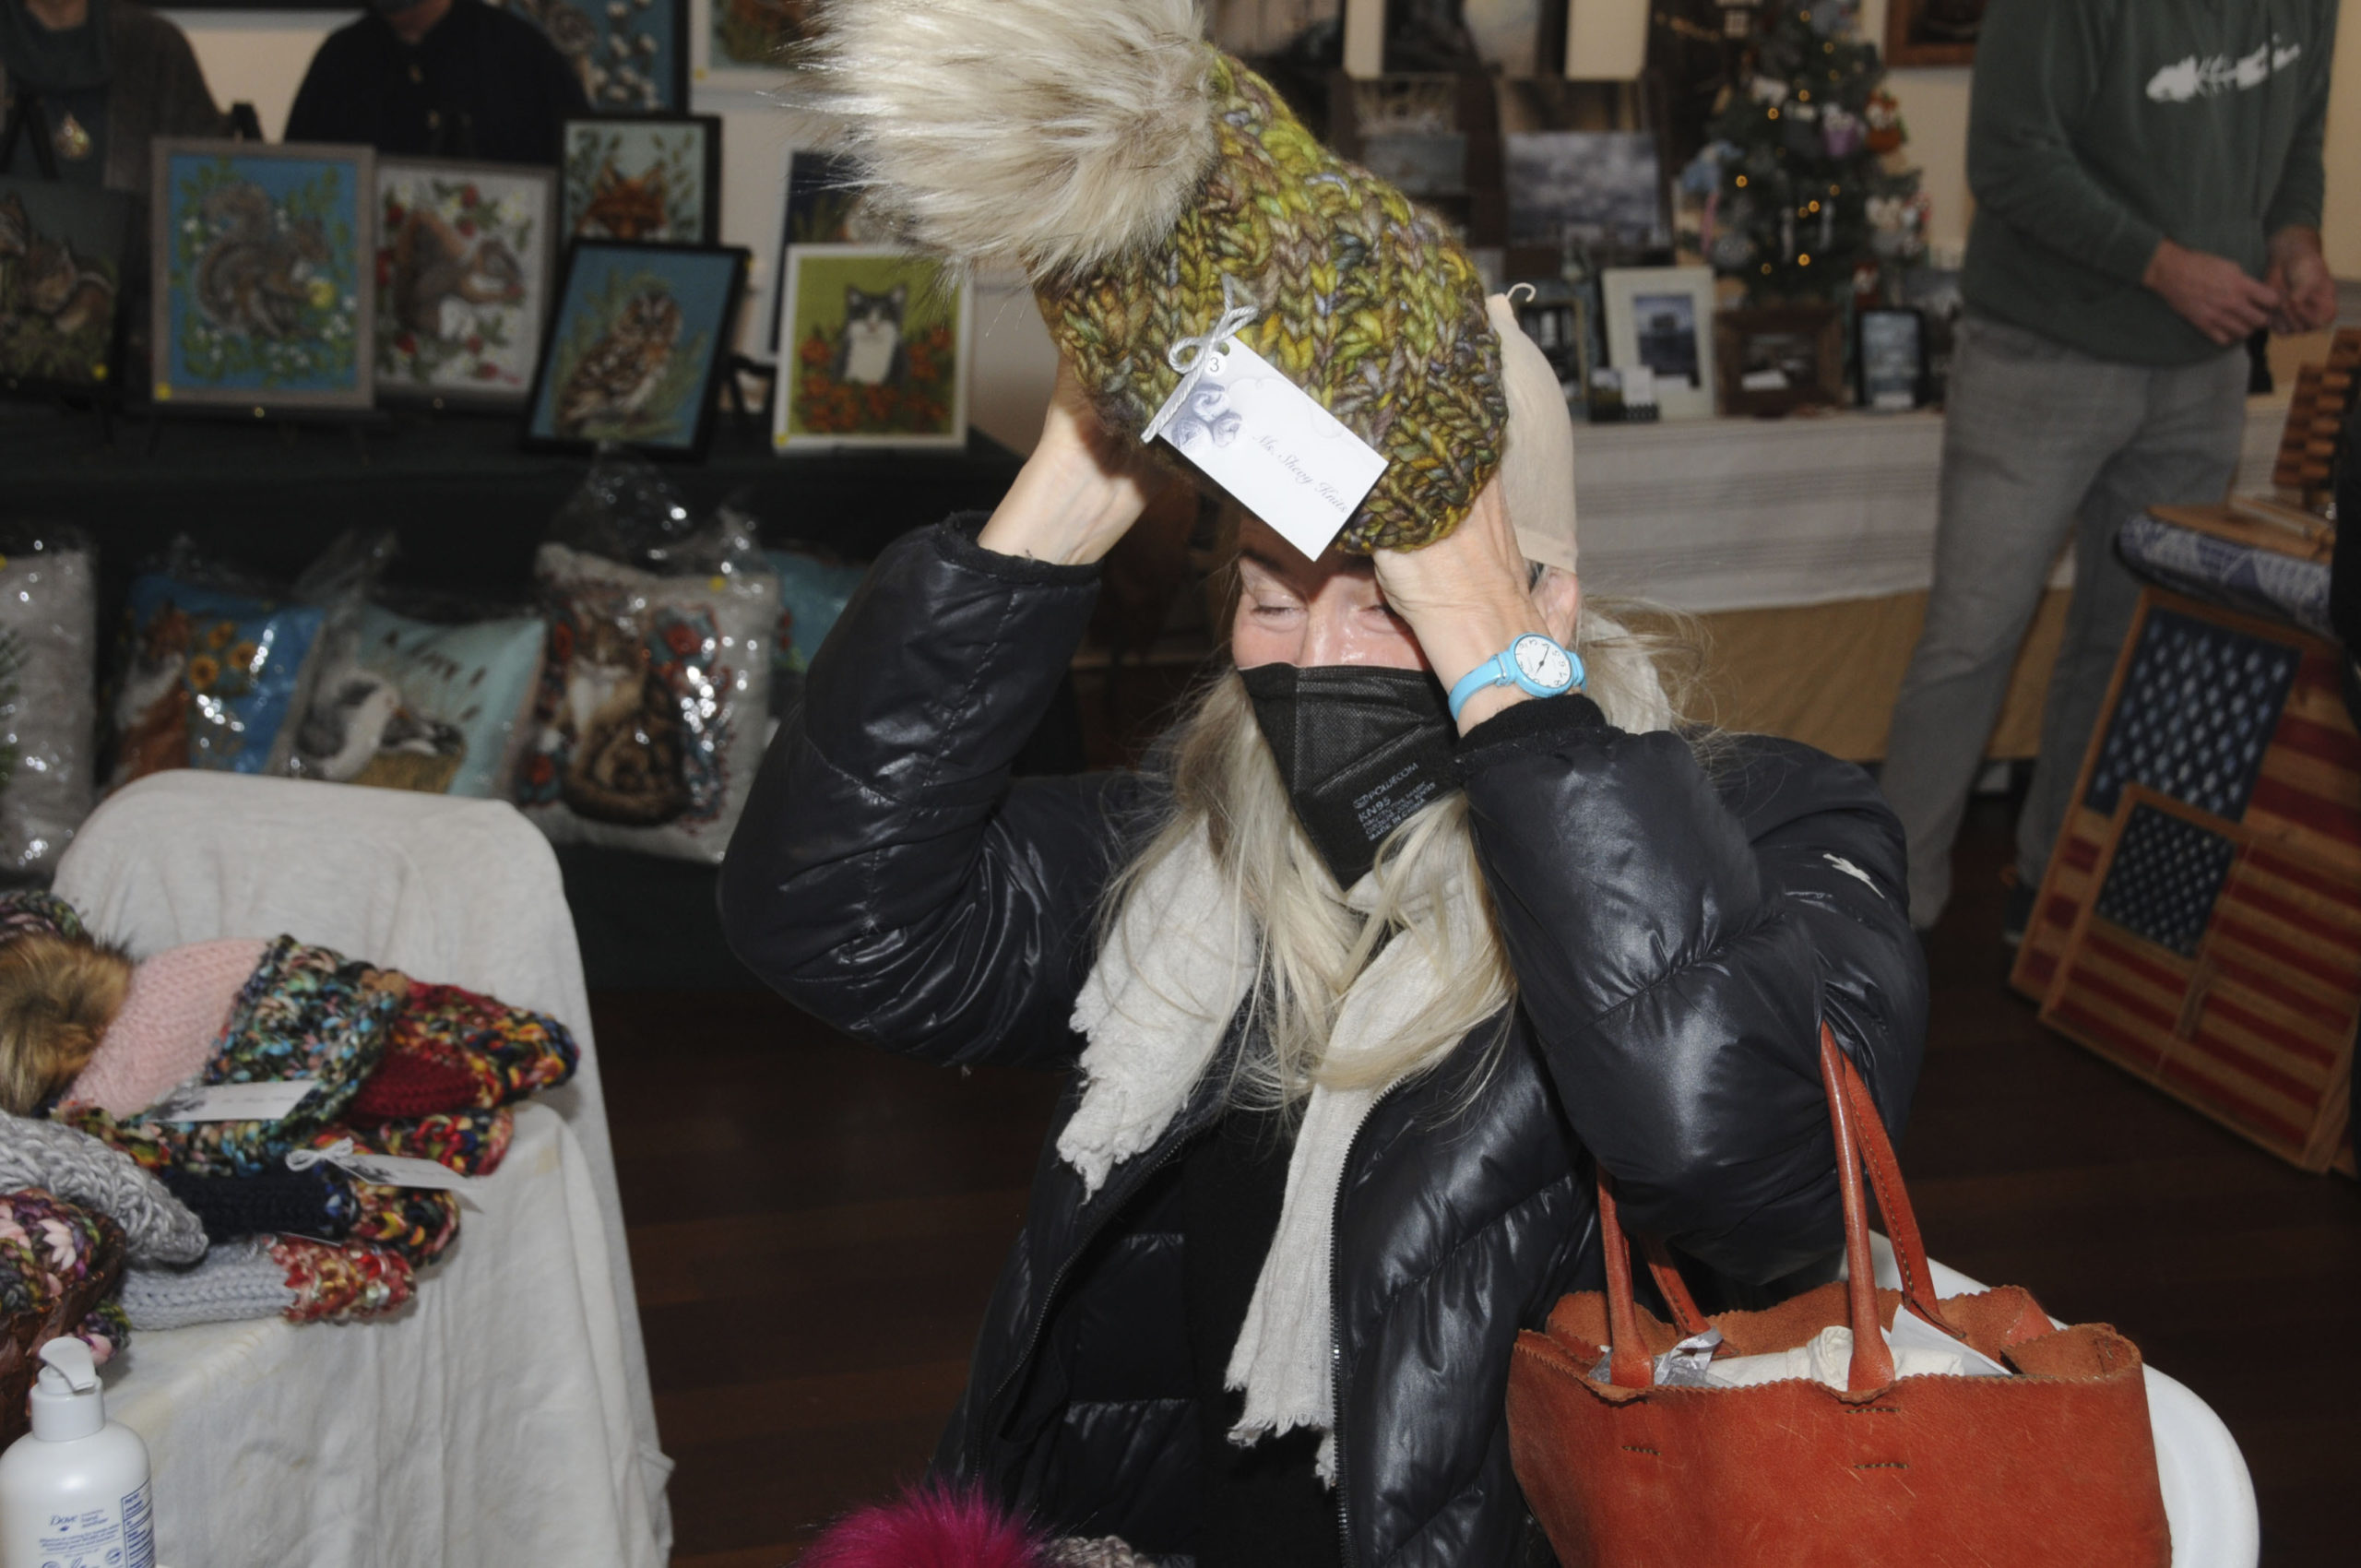 Kate Zahorsky tries on a hat at the Ashawagh Hall in Springs on Saturday were able to see and purchase artwork and crafts in a broad variety of media, from wood, metal, ceramics, paint and more, at the 11th Annual Friends Bazaar.    RICHARD LEWIN